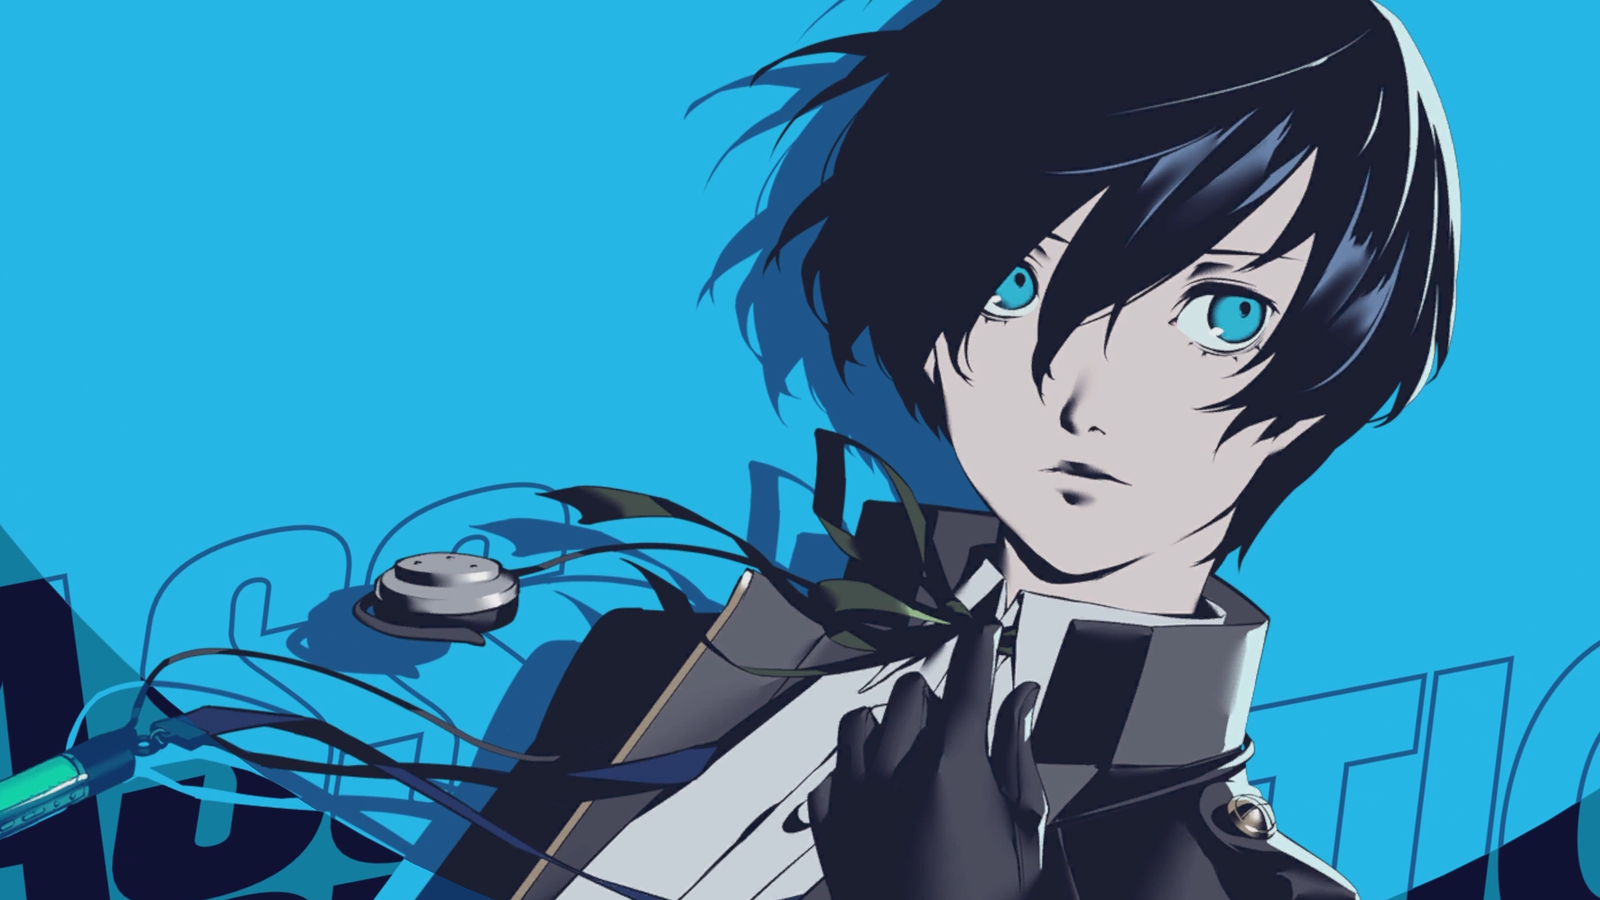 Persona 3 Reload Becomes Fastest-Selling Game in Atlus History With 1  Million Sales - IGN